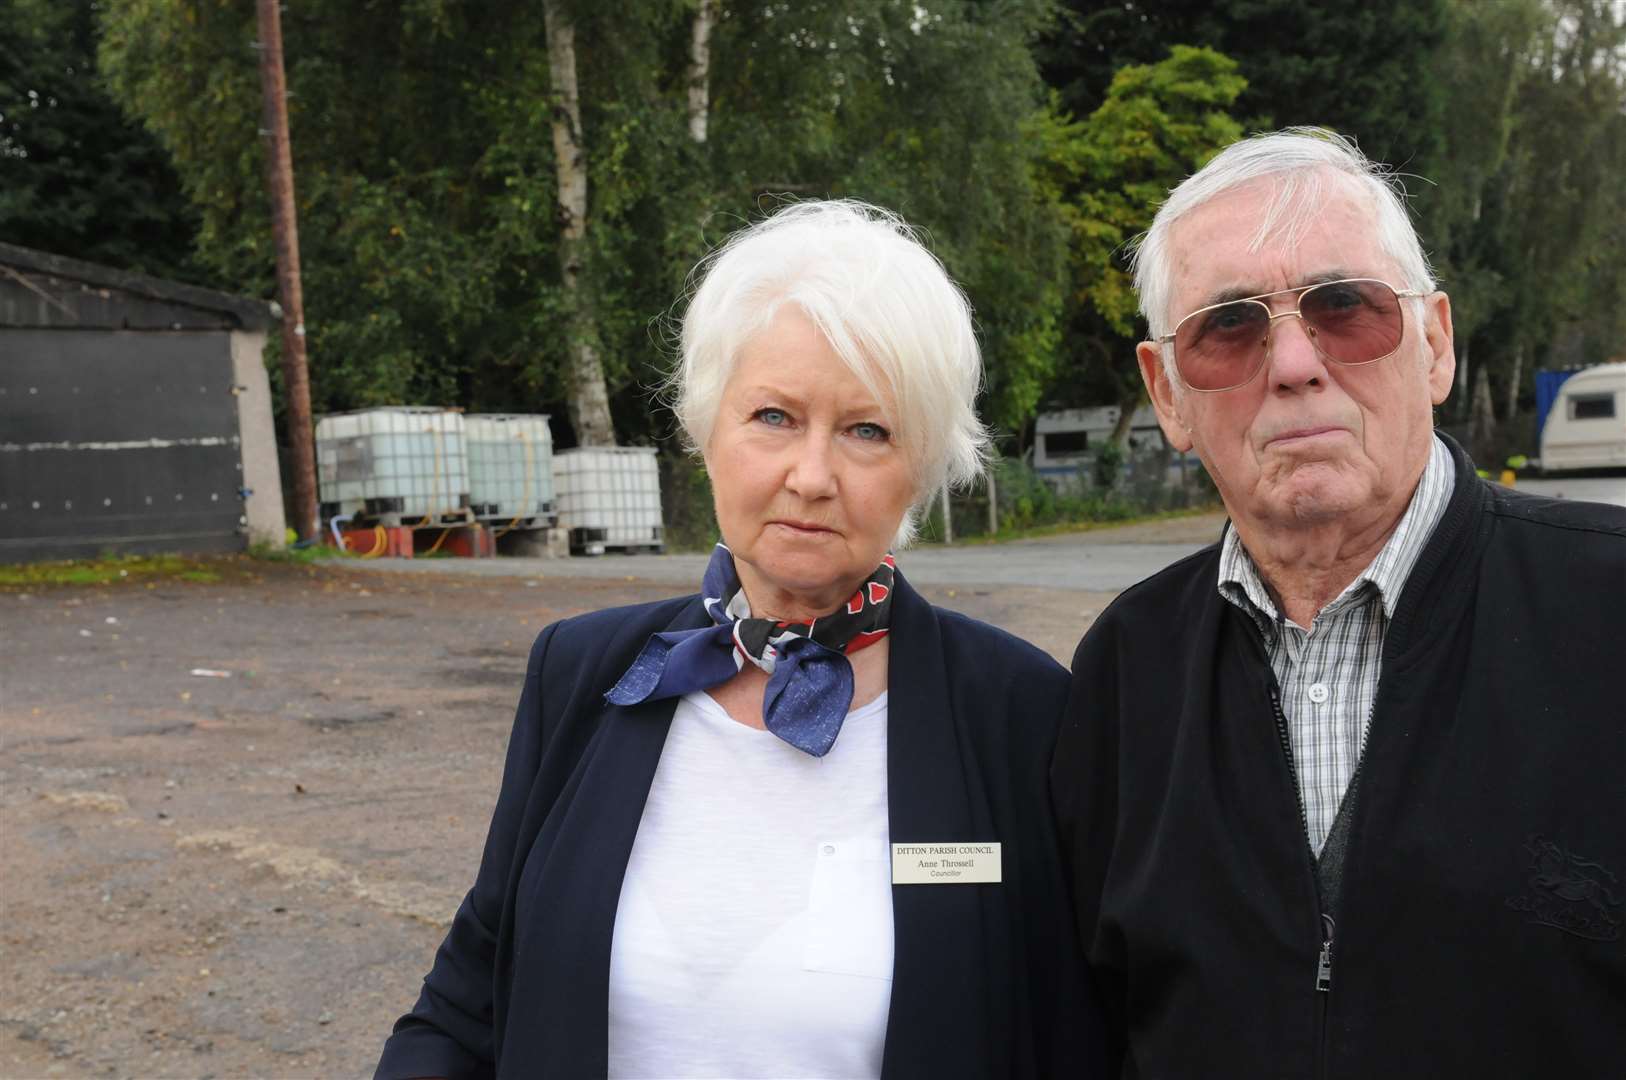 Cllr Anne Throssell and concerned resident Tony Mulcuck at the Ditton Tandoori car park